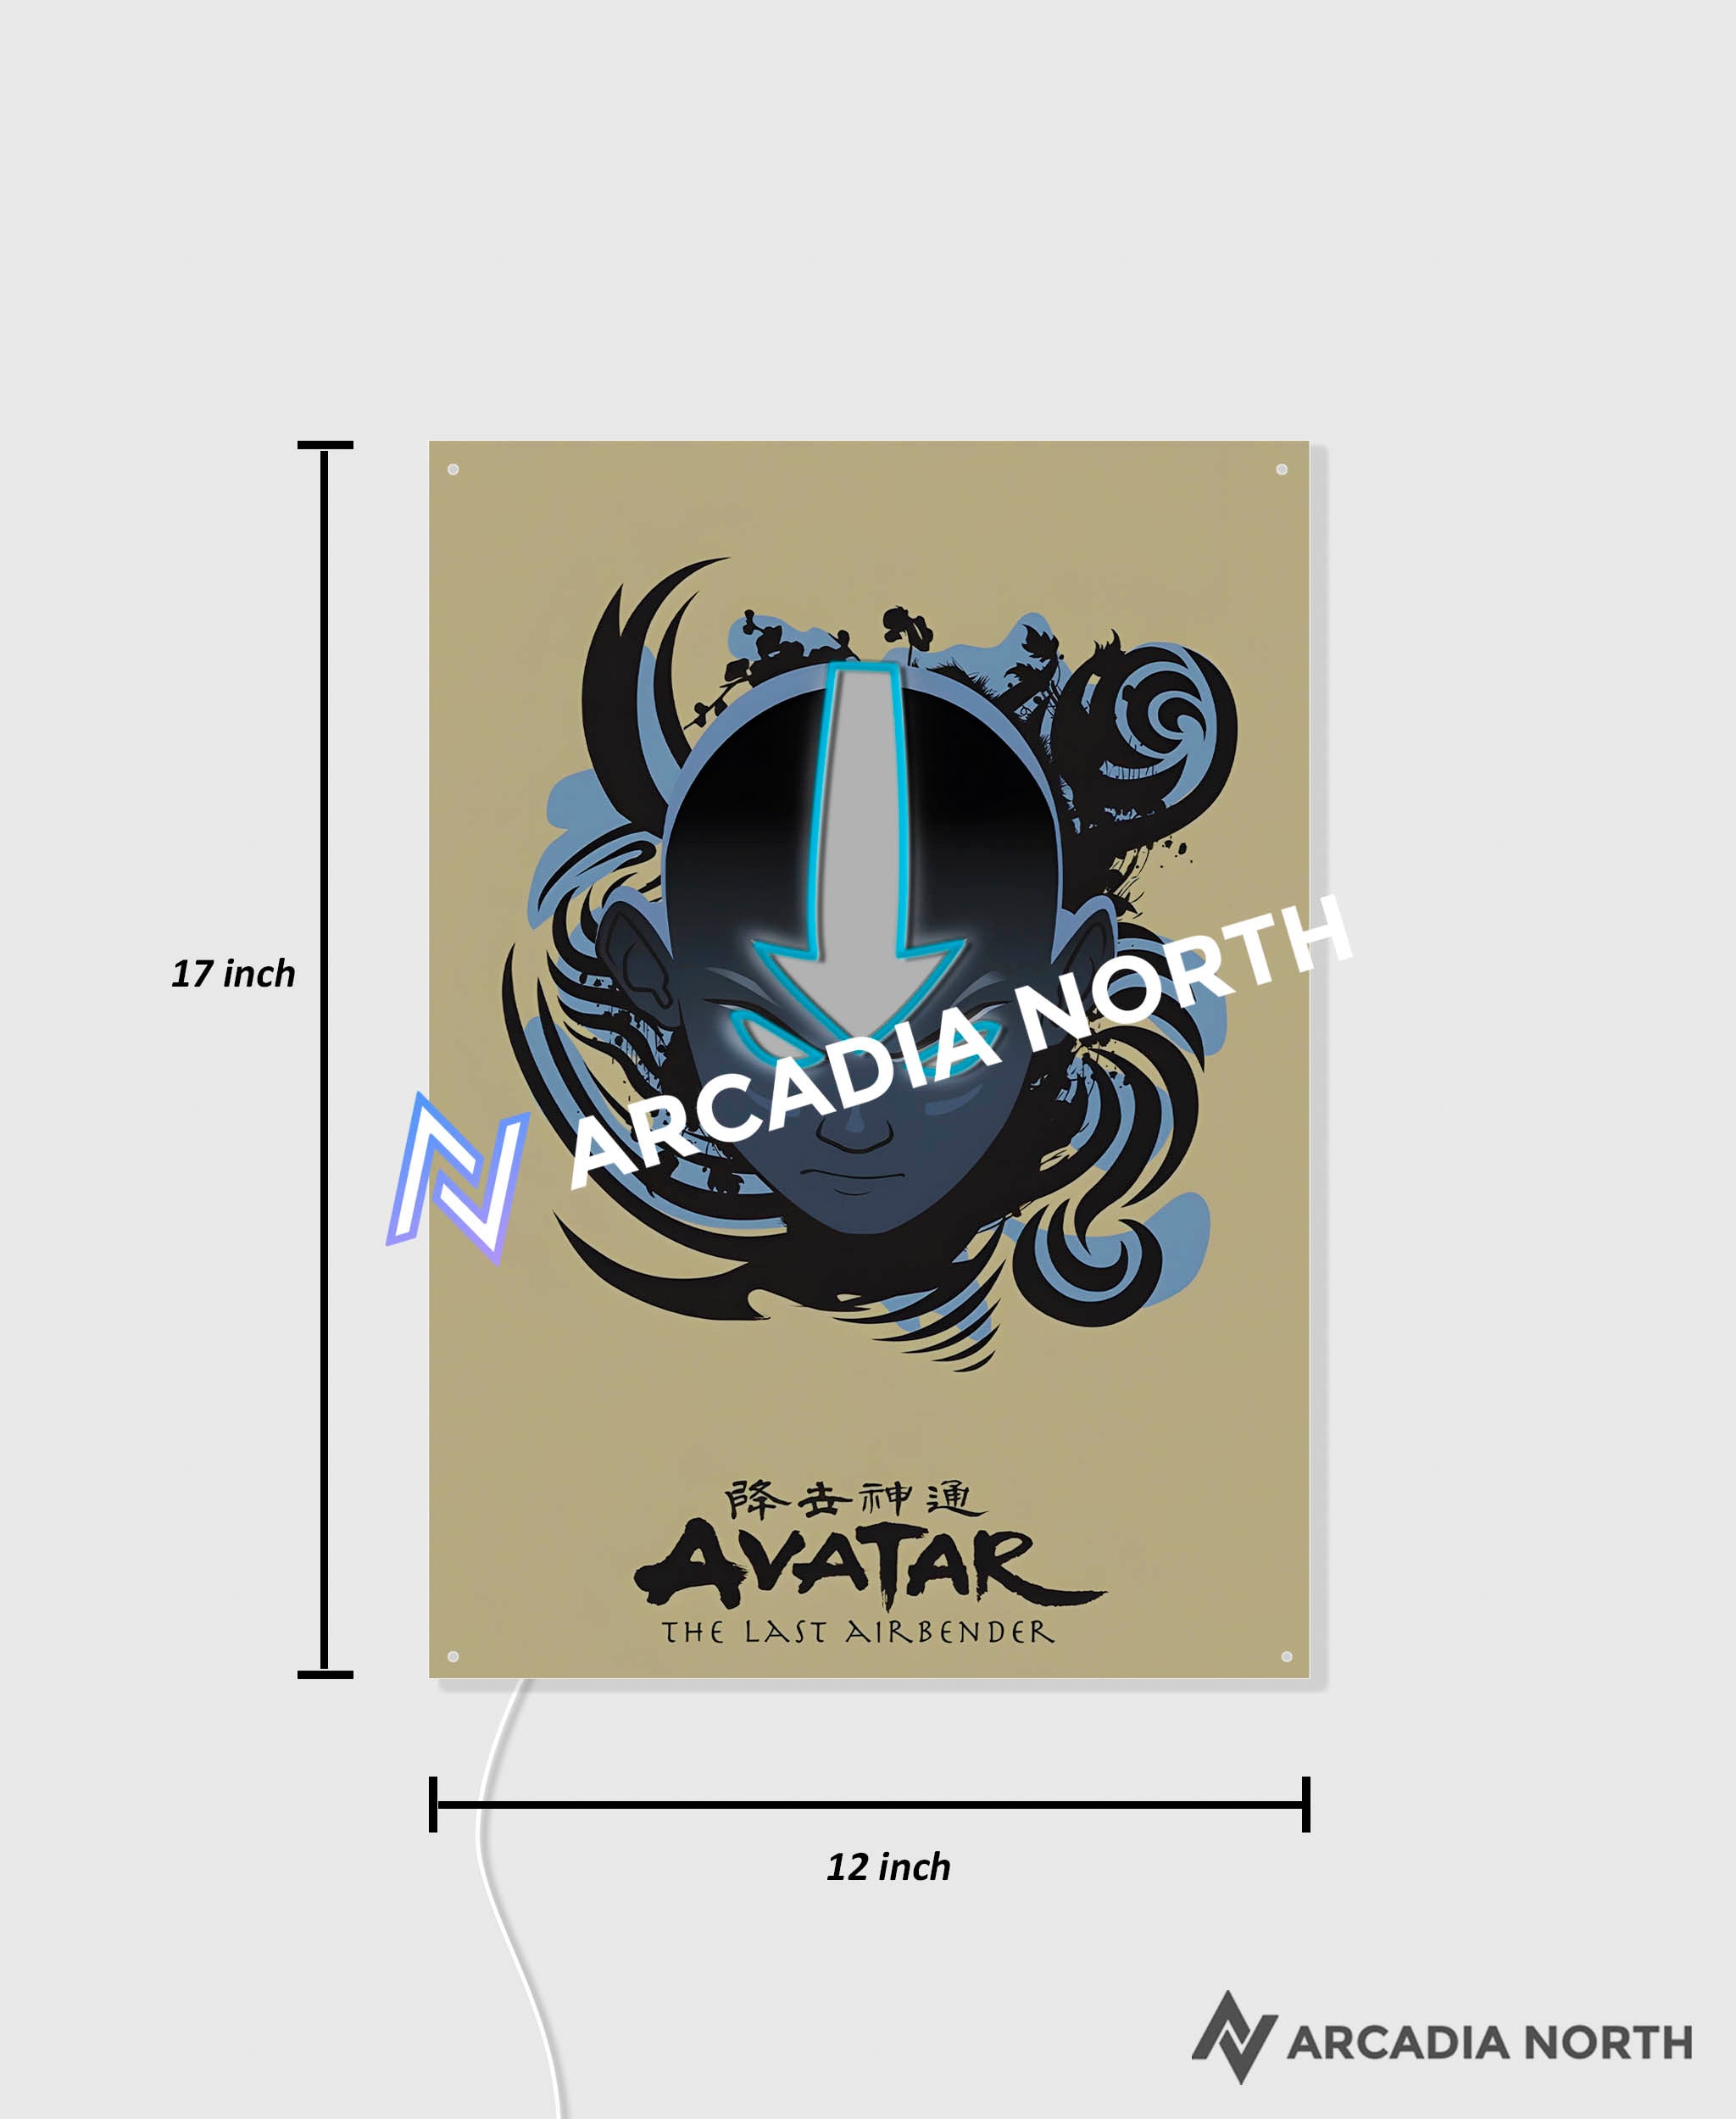 Arcadia North AURALIGHT Original LED Poster featuring the anime Avatar The Last Airbender with Aang and his arrow tattoo illuminated by glowing LED neon lights like the Avatar State. UV-printed poster on acrylic.